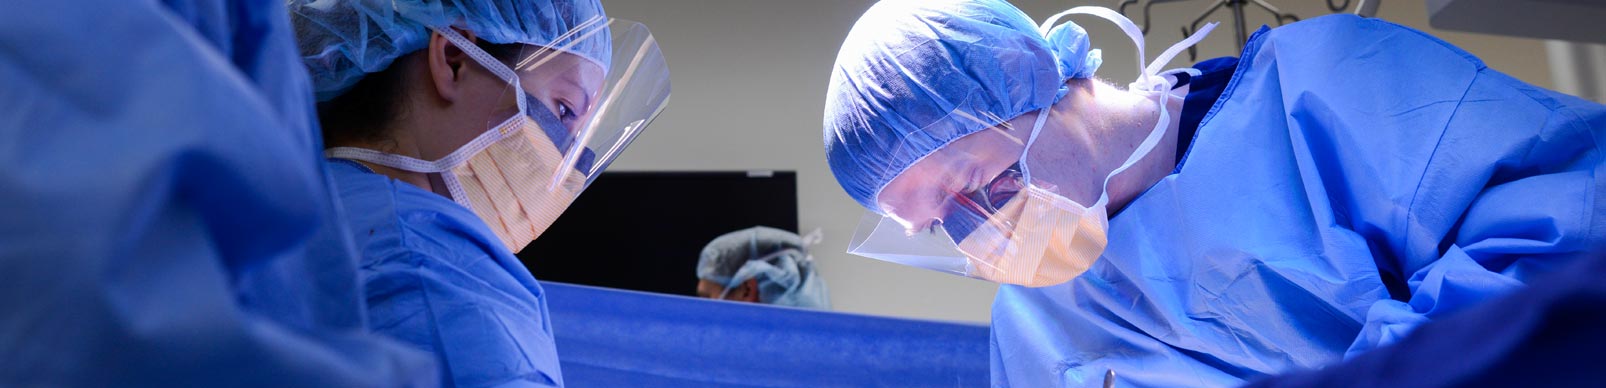 Two surgeons during a procedure